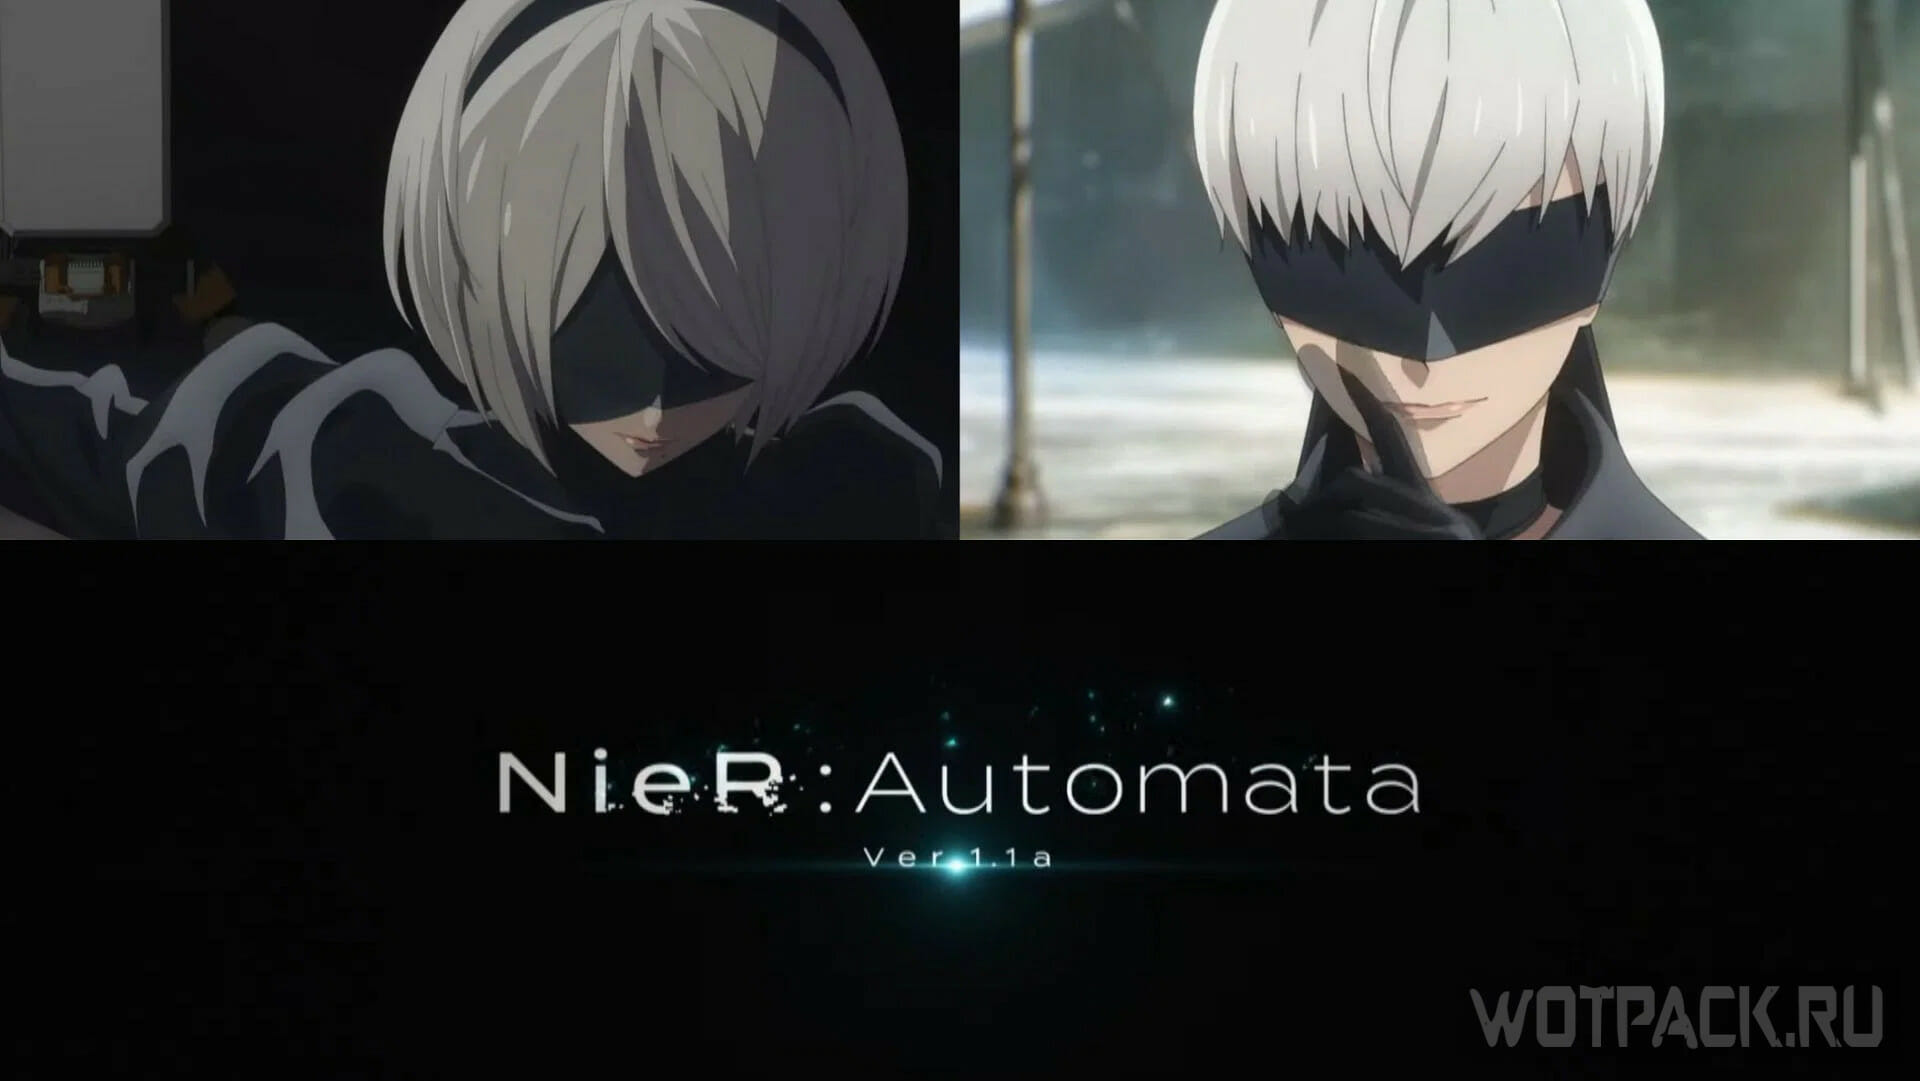 NieR Automata Ver1.1a Episode Guide: Release Date and Timings